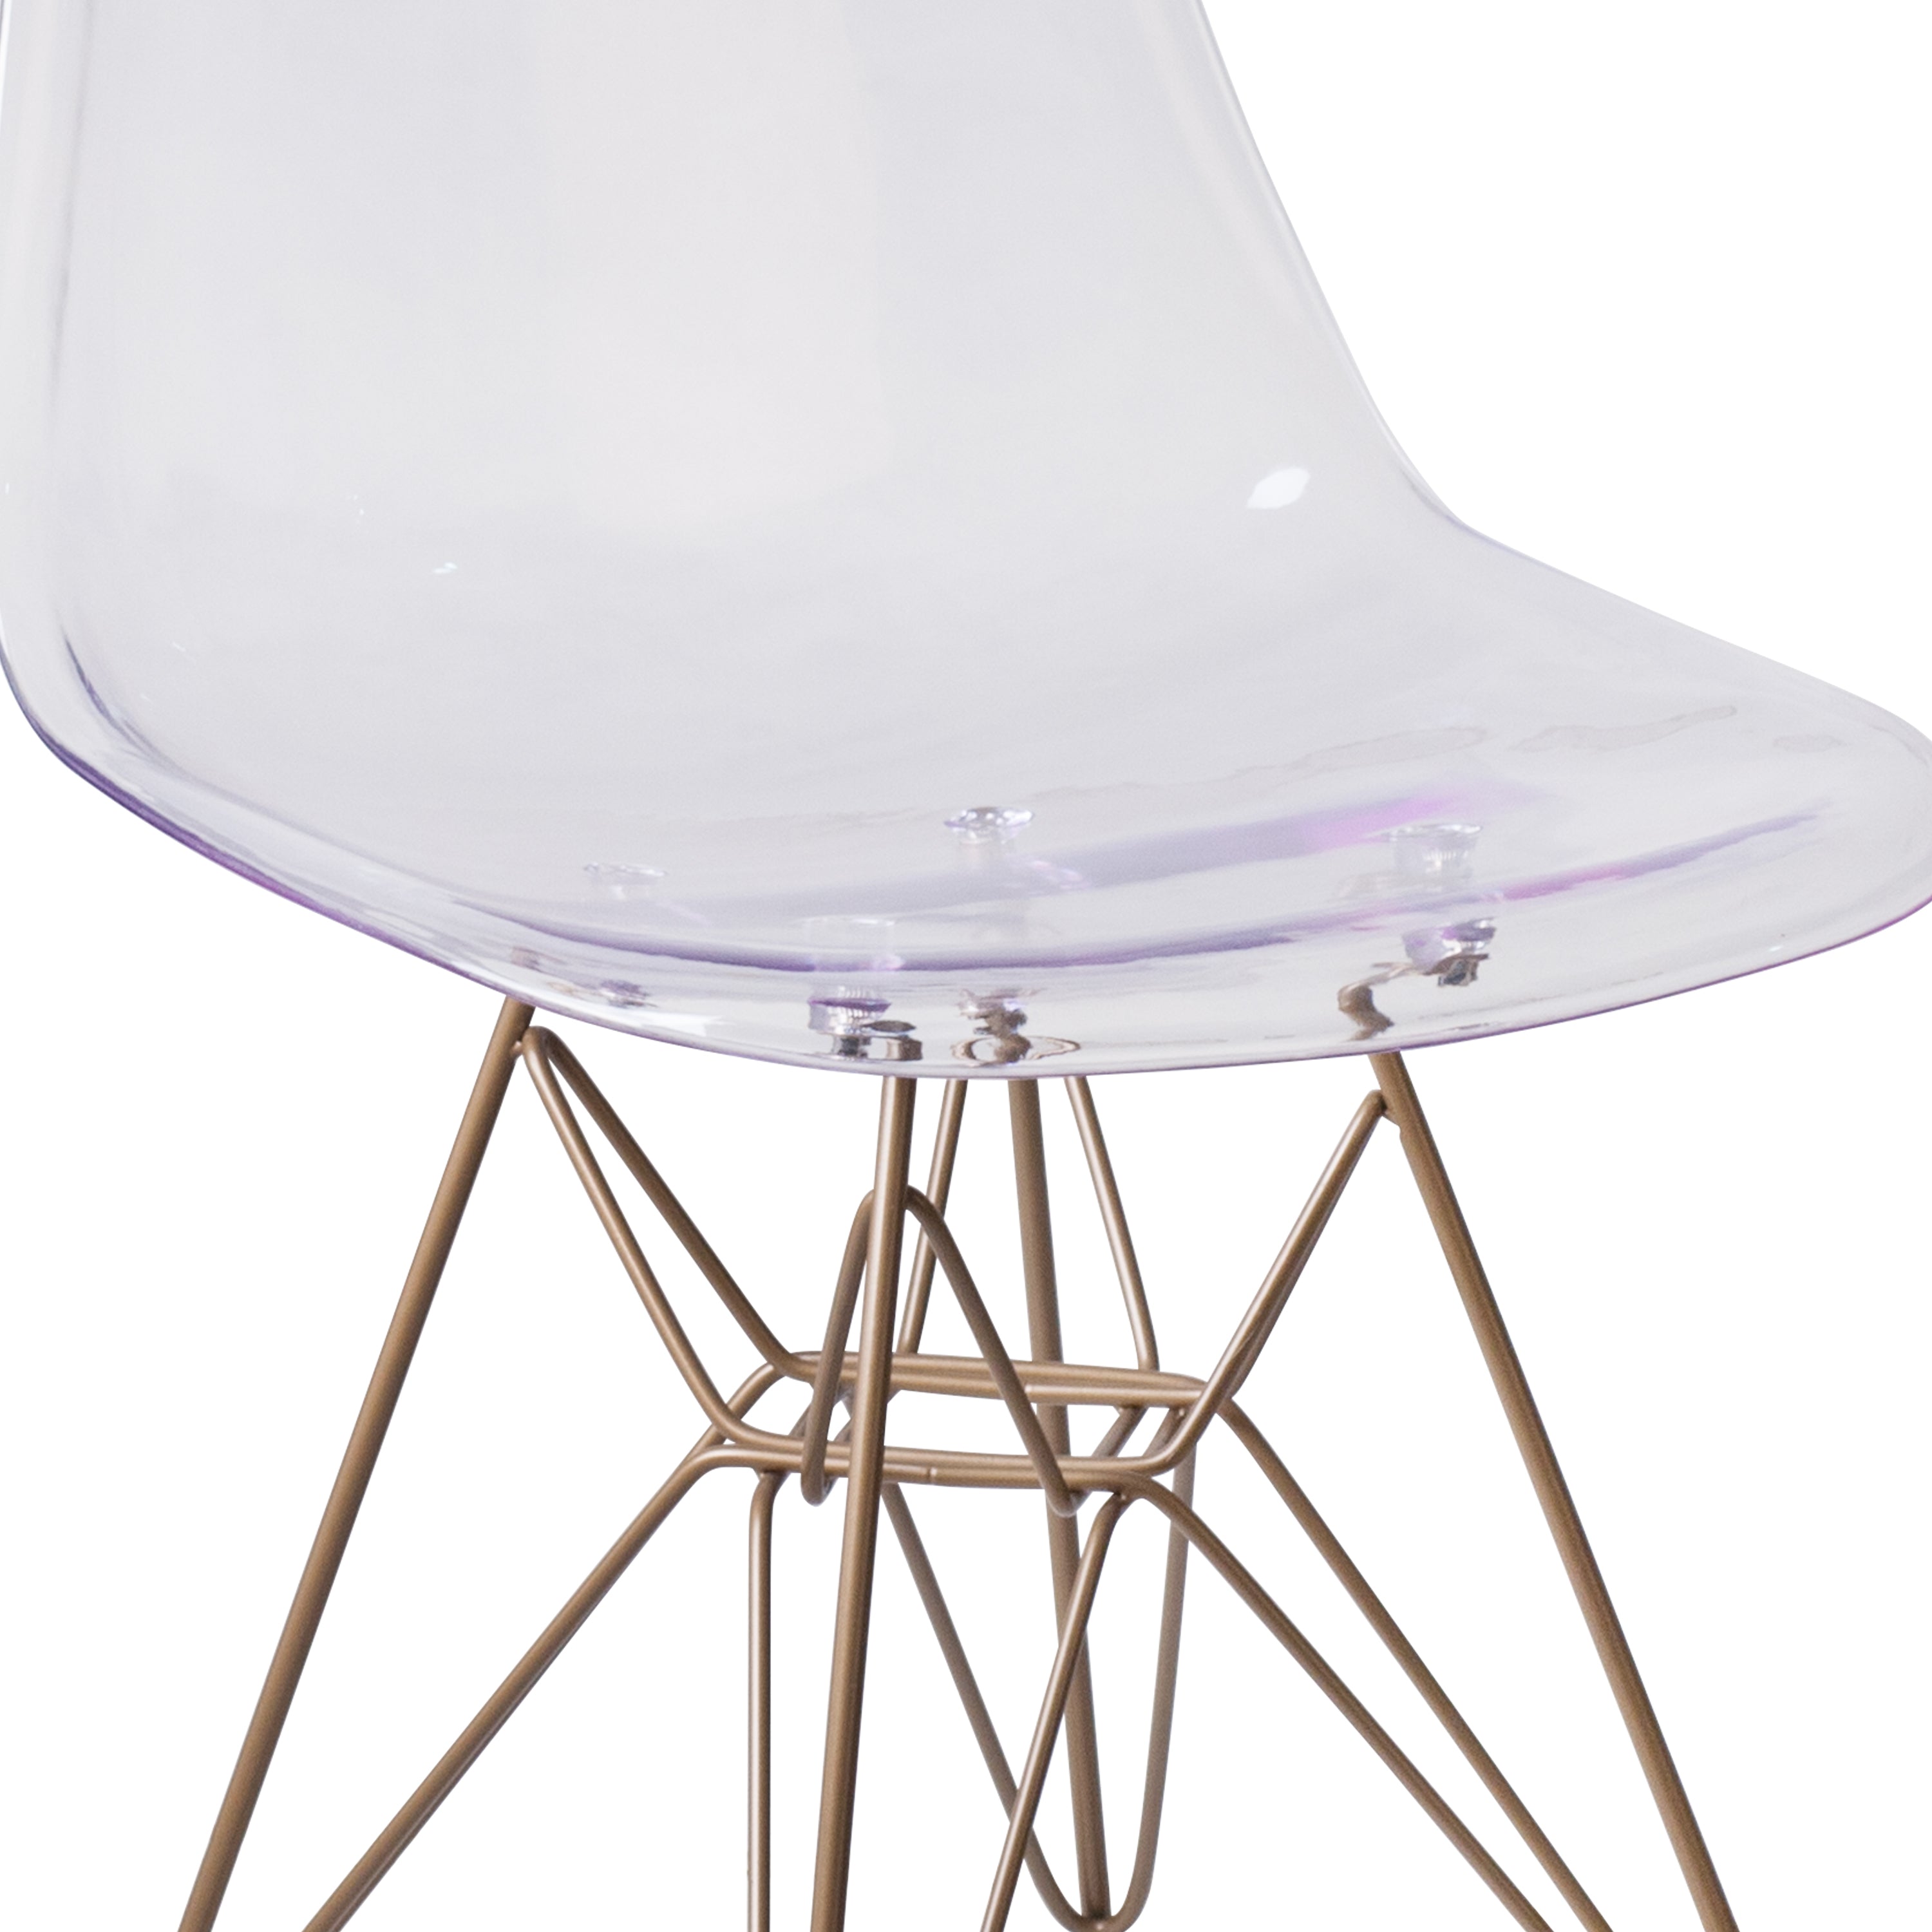 Elon Series Ghost Chair with Gold Metal Base-Accent Chair-Flash Furniture-Wall2Wall Furnishings